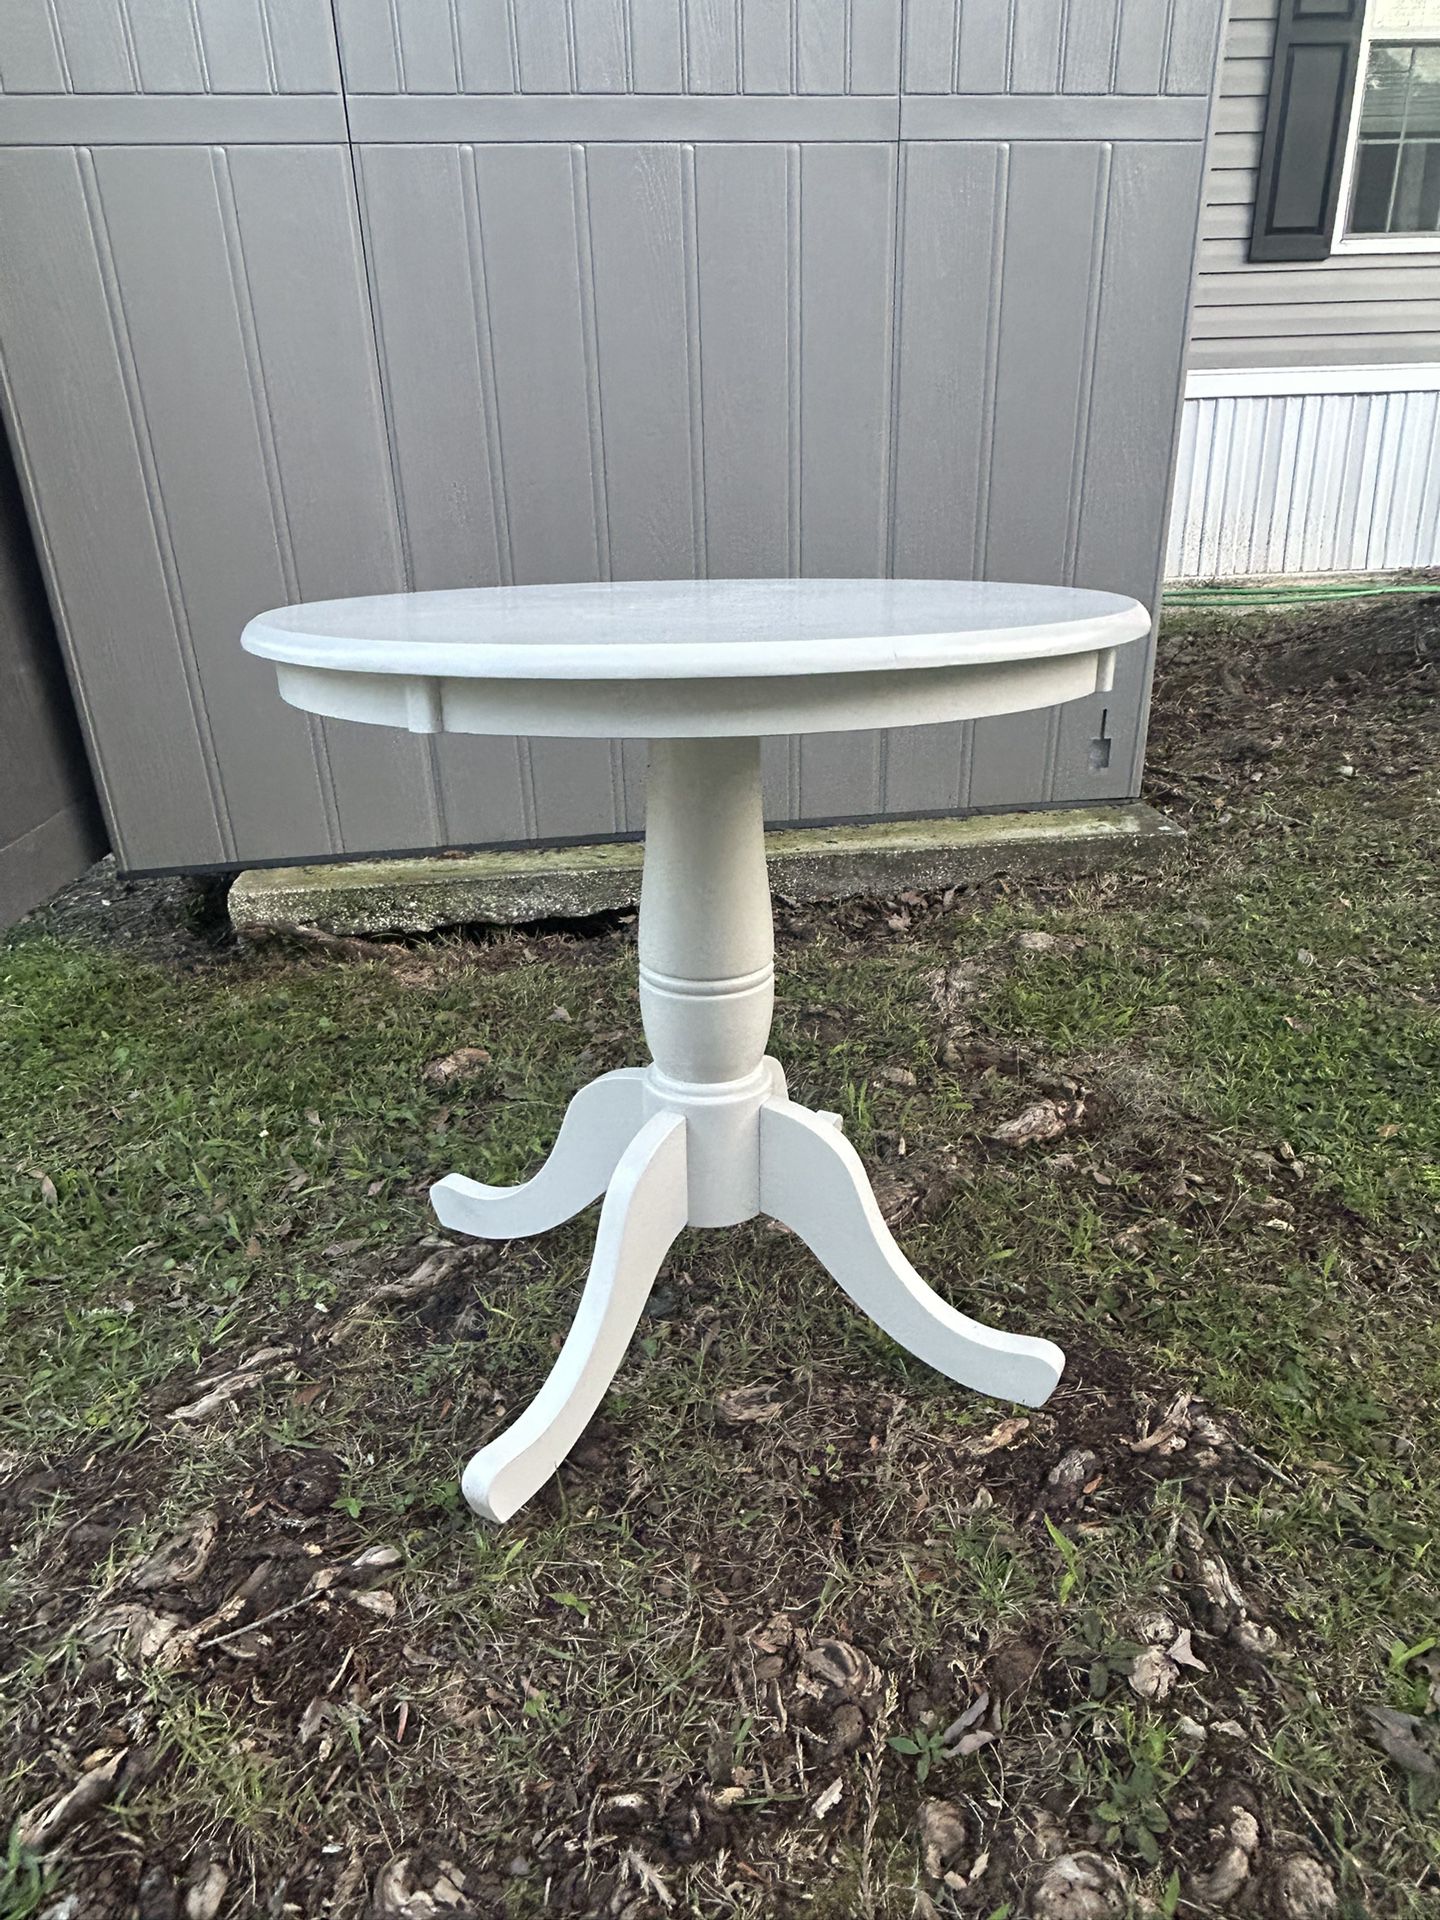 White Wooden Kitchen Decorative Round Table 30X30 Gently Used, Good Condition. $60 OBO